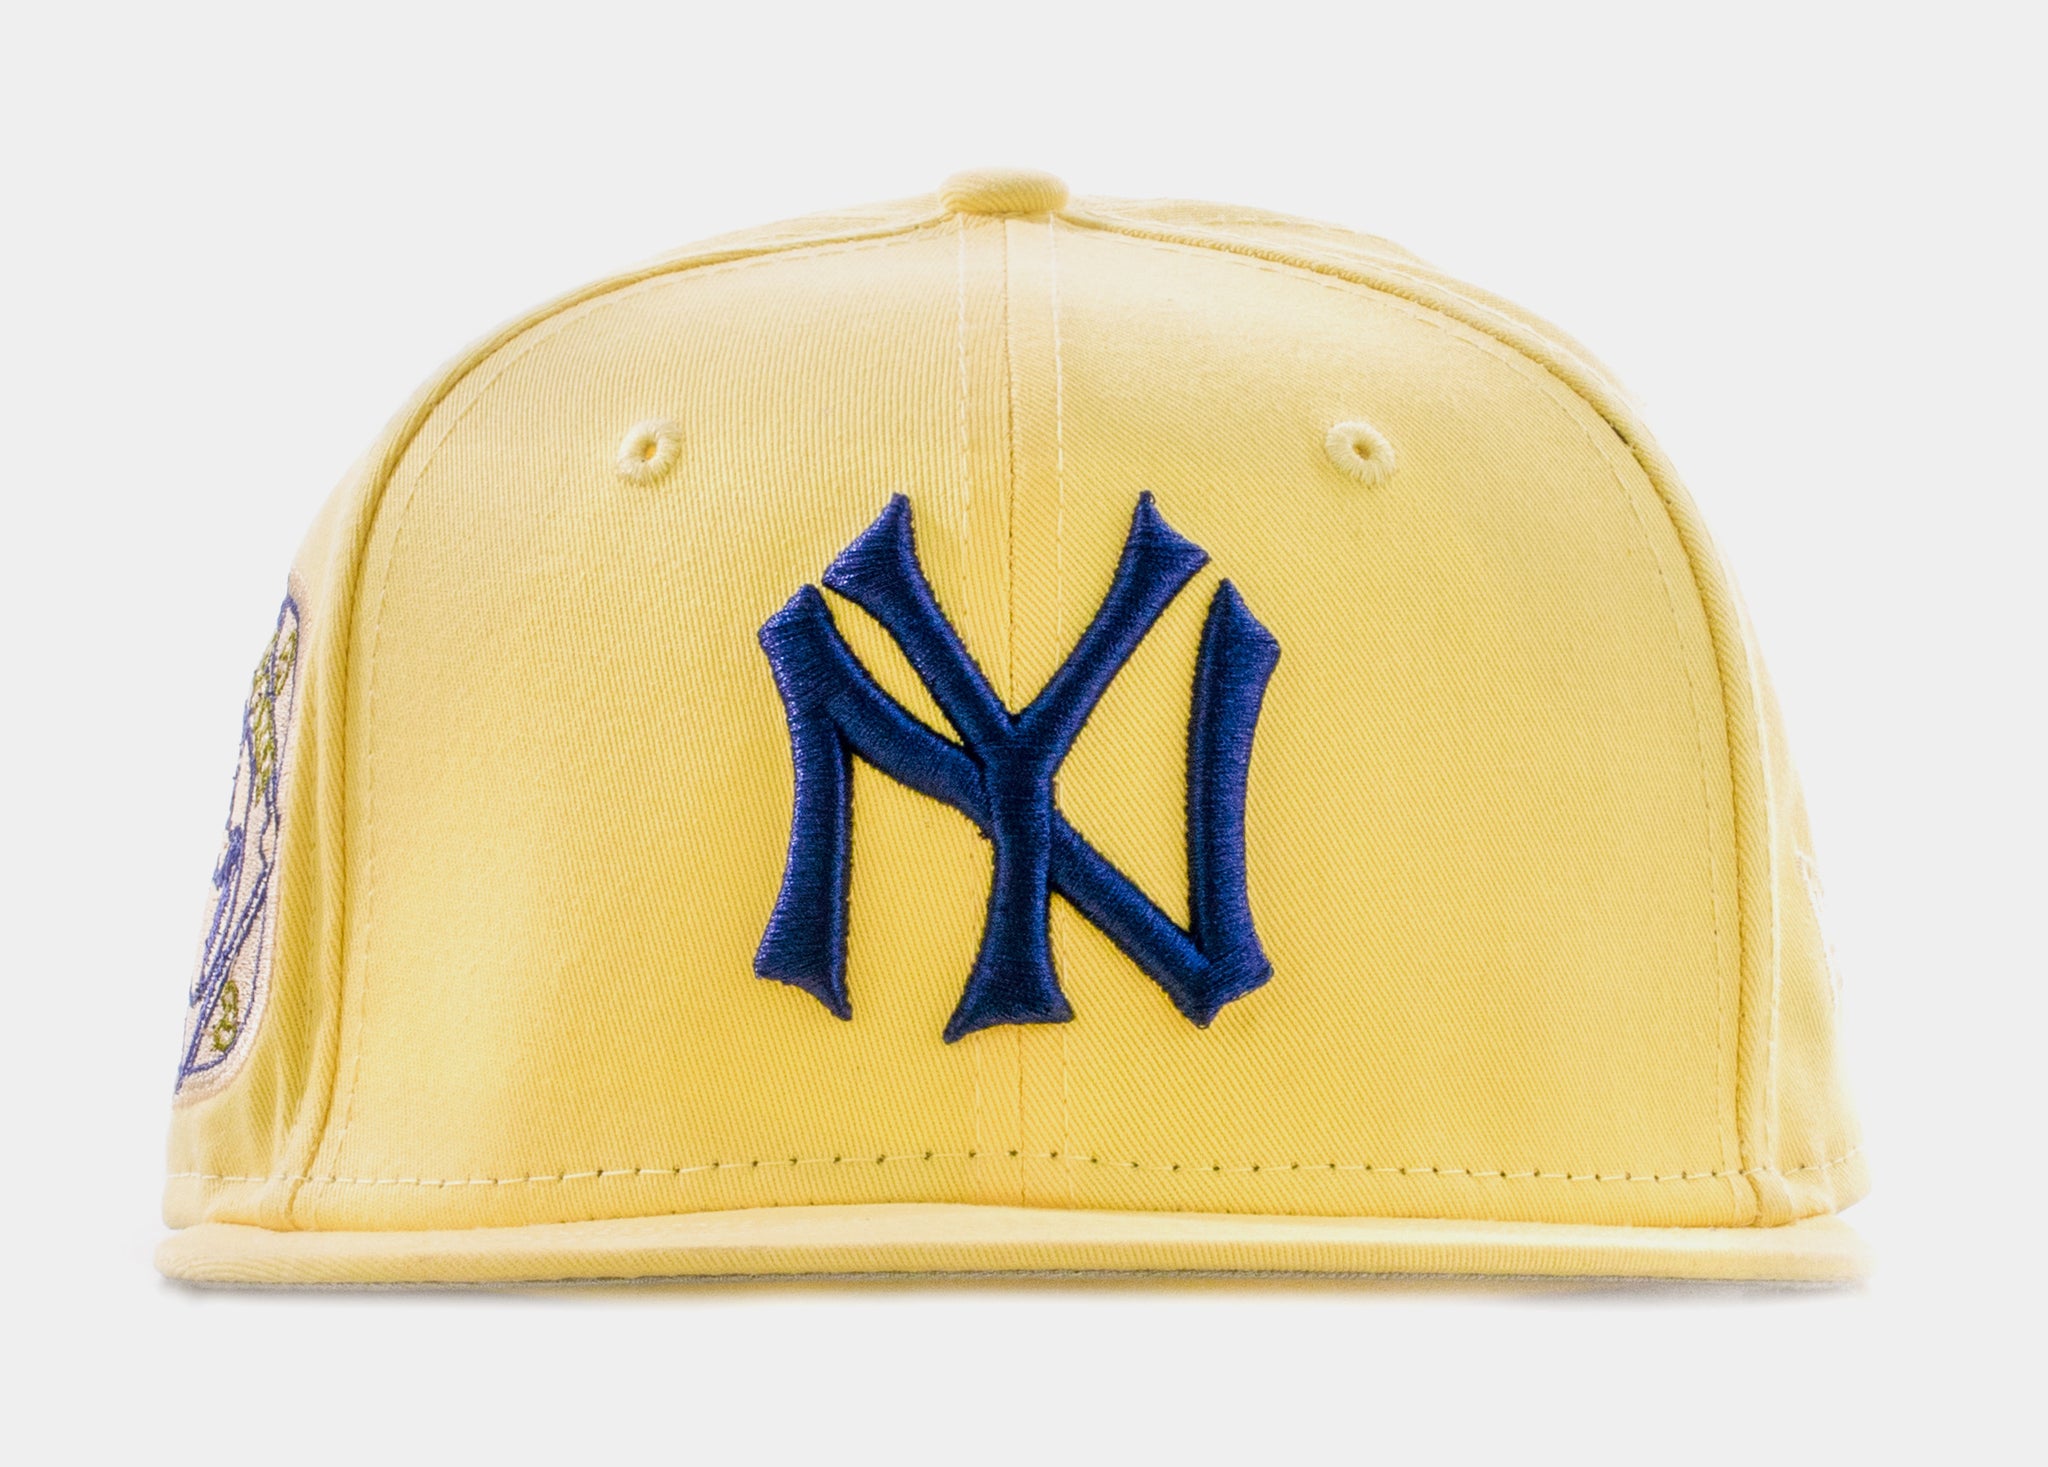 New York Yankees New Era Cooperstown Collection Wool 59FIFTY Fitted Hat - Navy, Size: 7 1/2, Blue